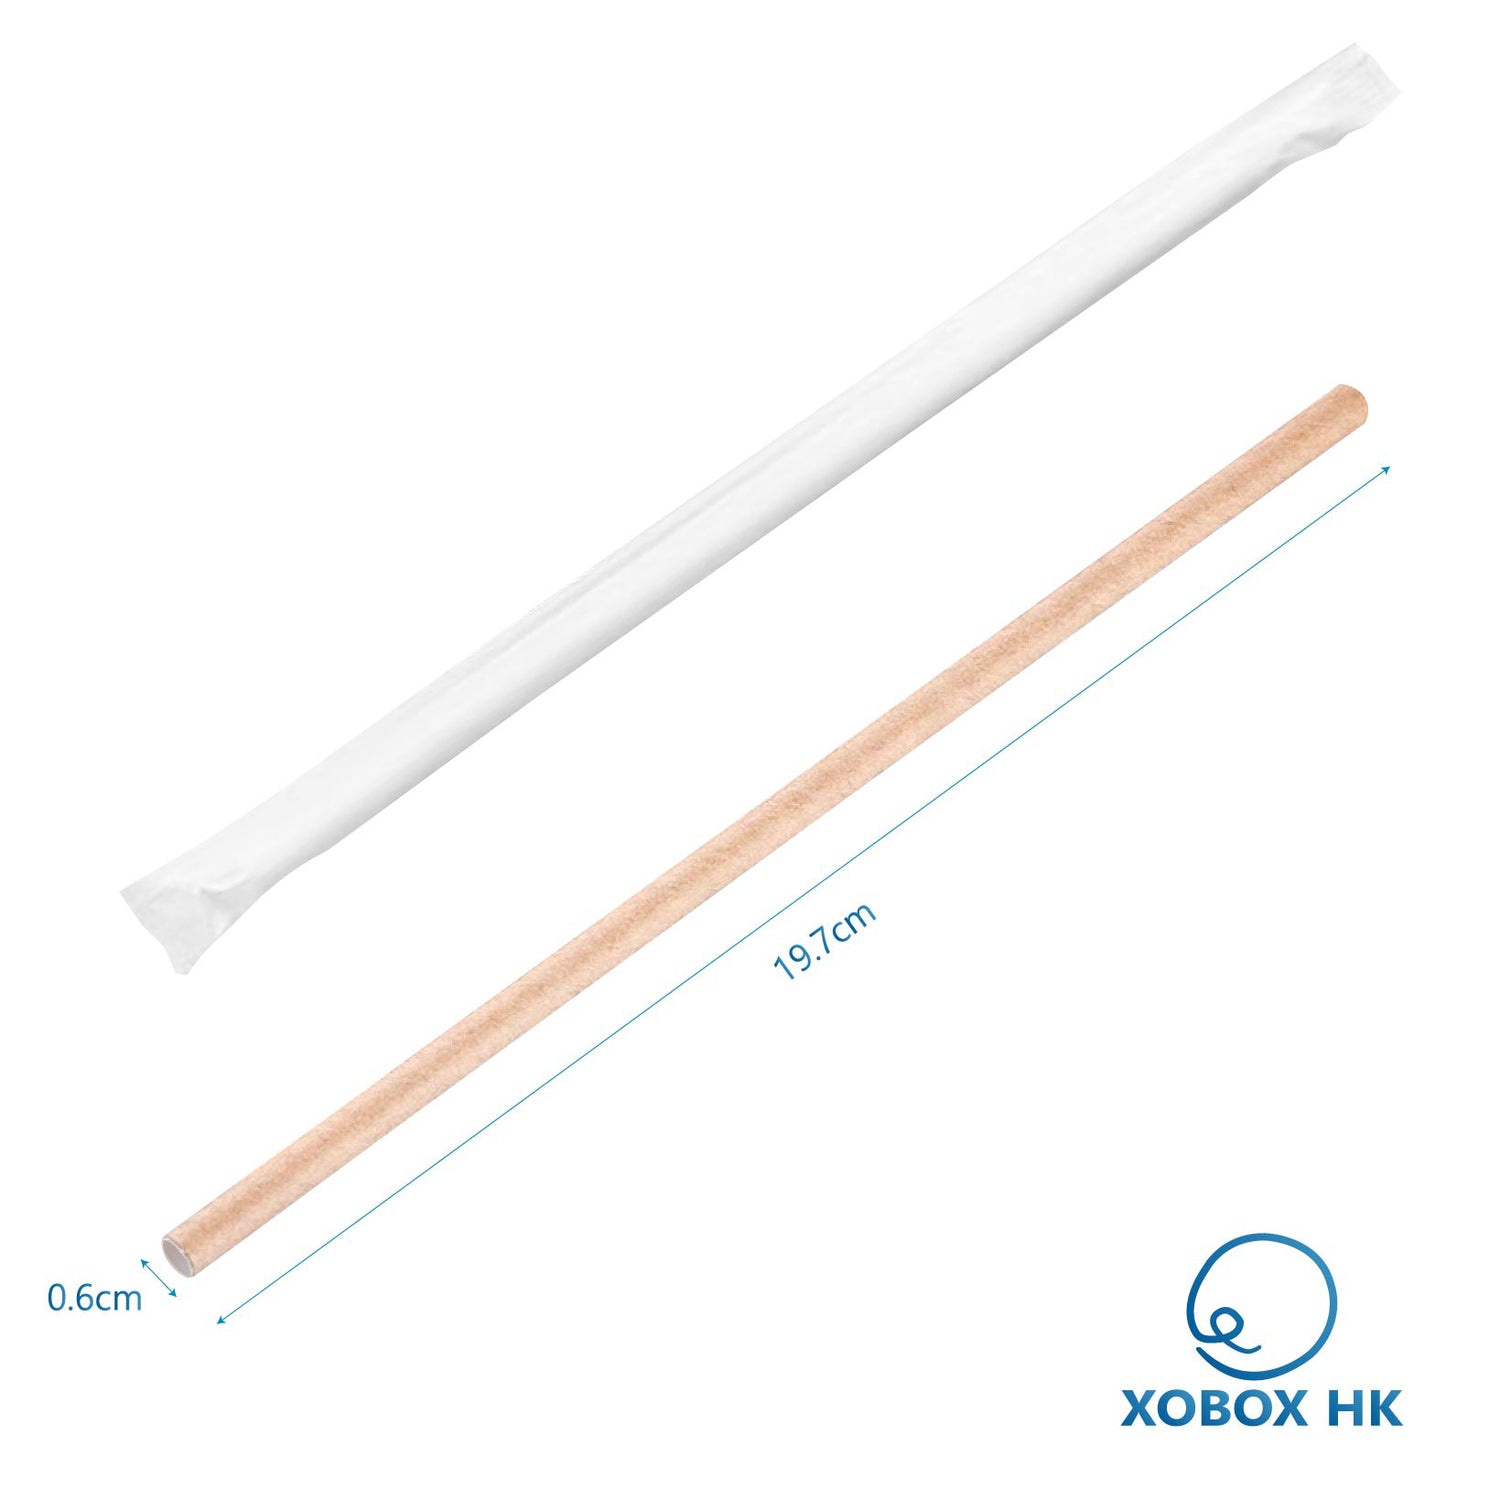 Wooden Biodegradable Disposable Cutlery Set        木製可降解一次性餐具用品组合 /      PAPER DISPOSABLE DRINKING STRAWS 一次性環保紙飲管(獨立包裝)